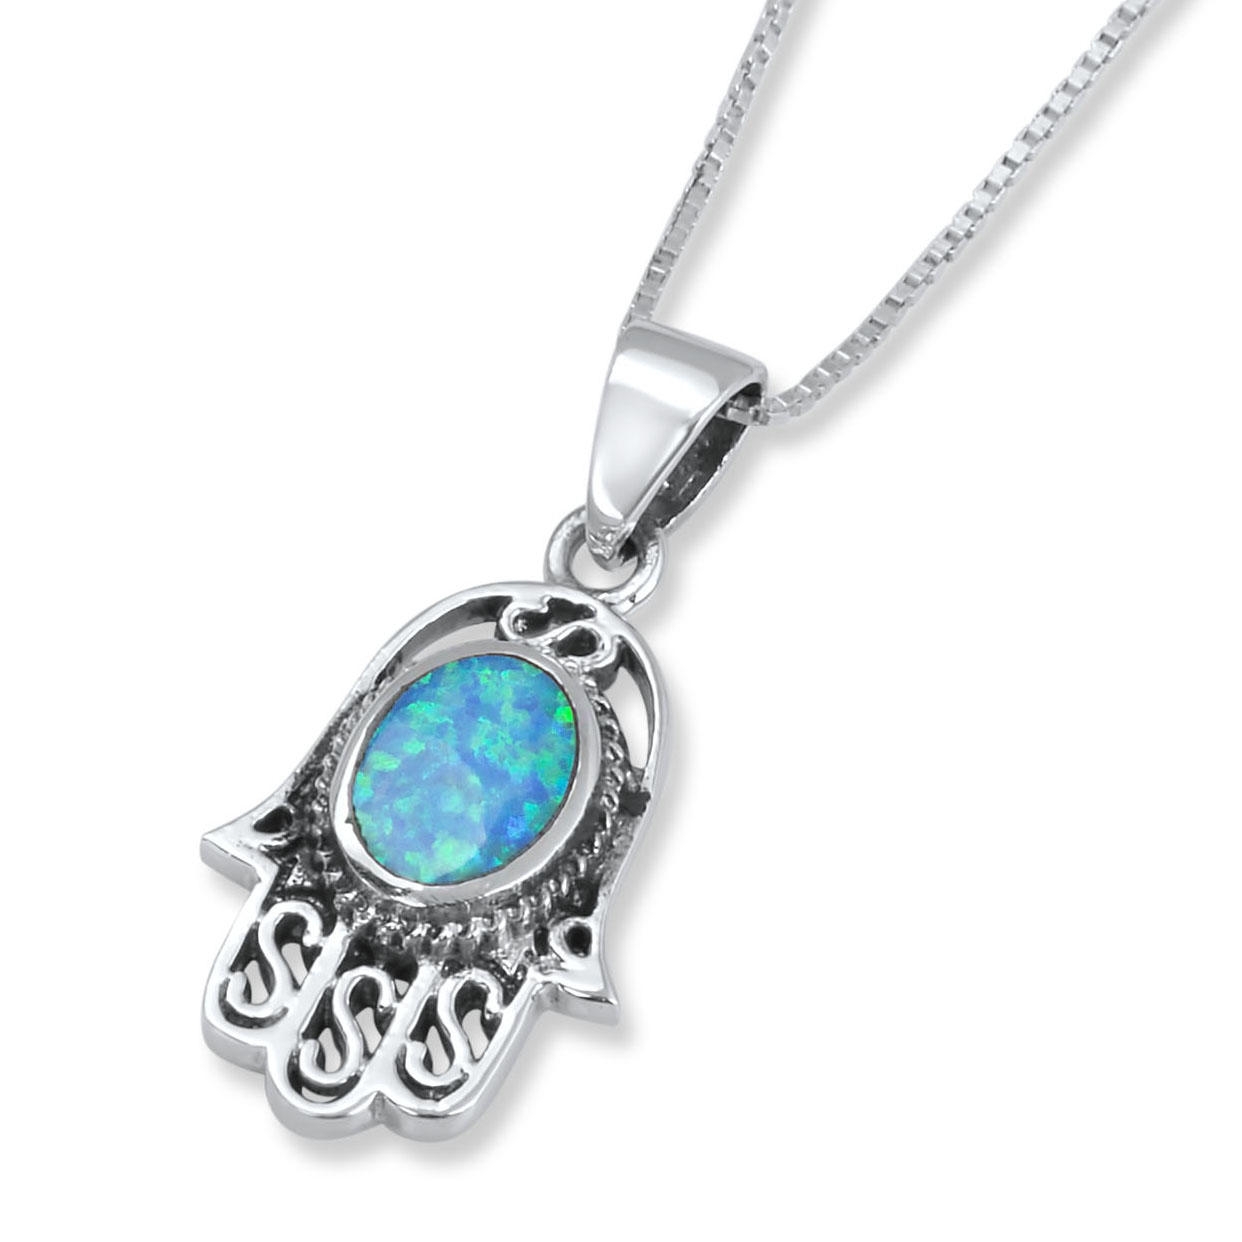 Sterling Silver Hamsa Necklace with Opal Stone Center - 1